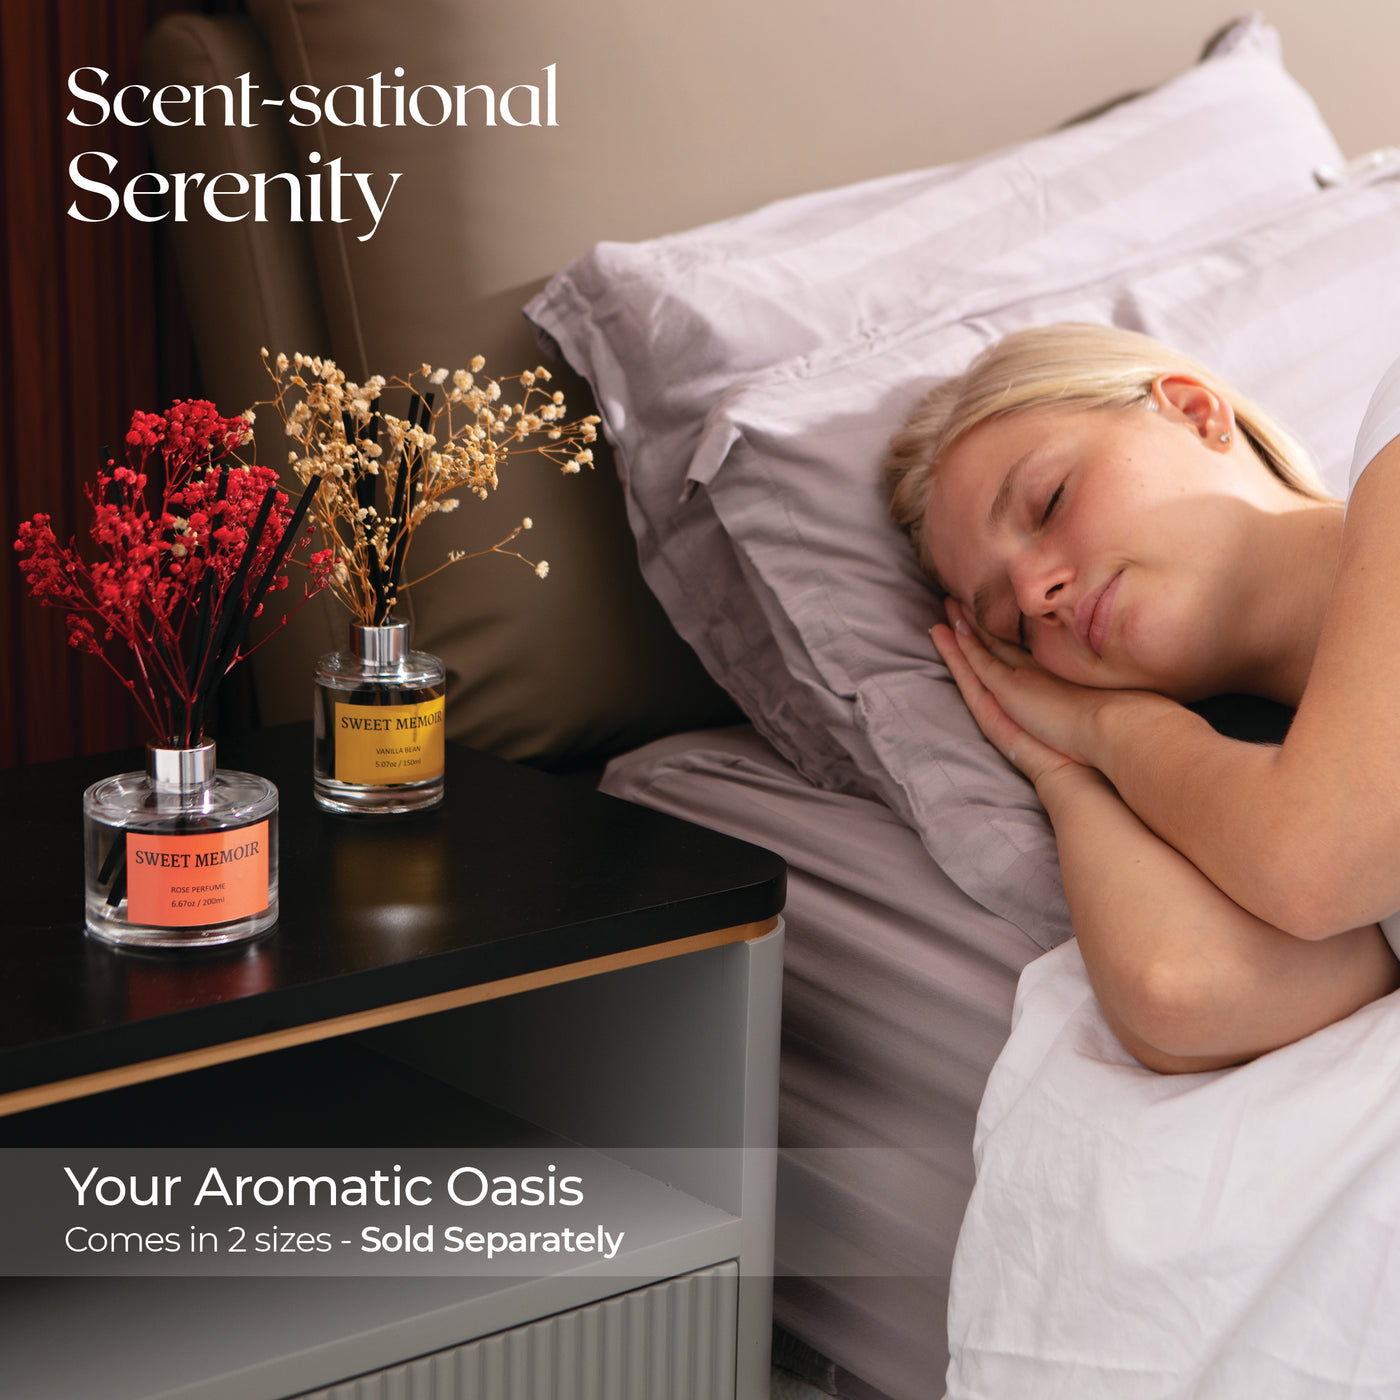 Tranquil sleeping scene with a woman and a Sweet Memoir reed diffuser on the nightstand, suggesting a serene and aromatic environment.